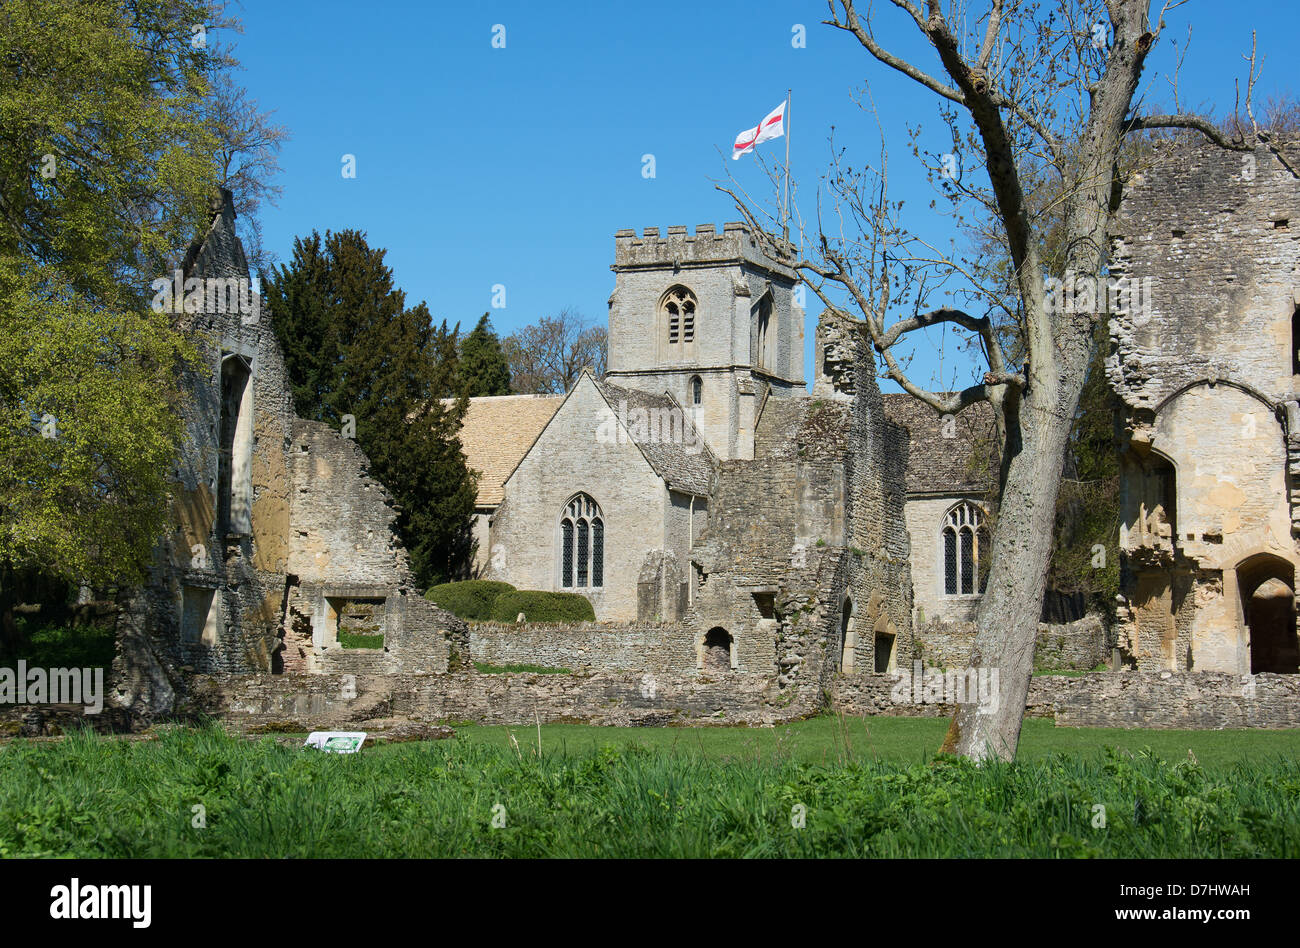 OXFORDSHIRE, UK. St. Kenelm's Parish Church and the ruins of Minster Lovell Hall near Witney. 2013. Stock Photo